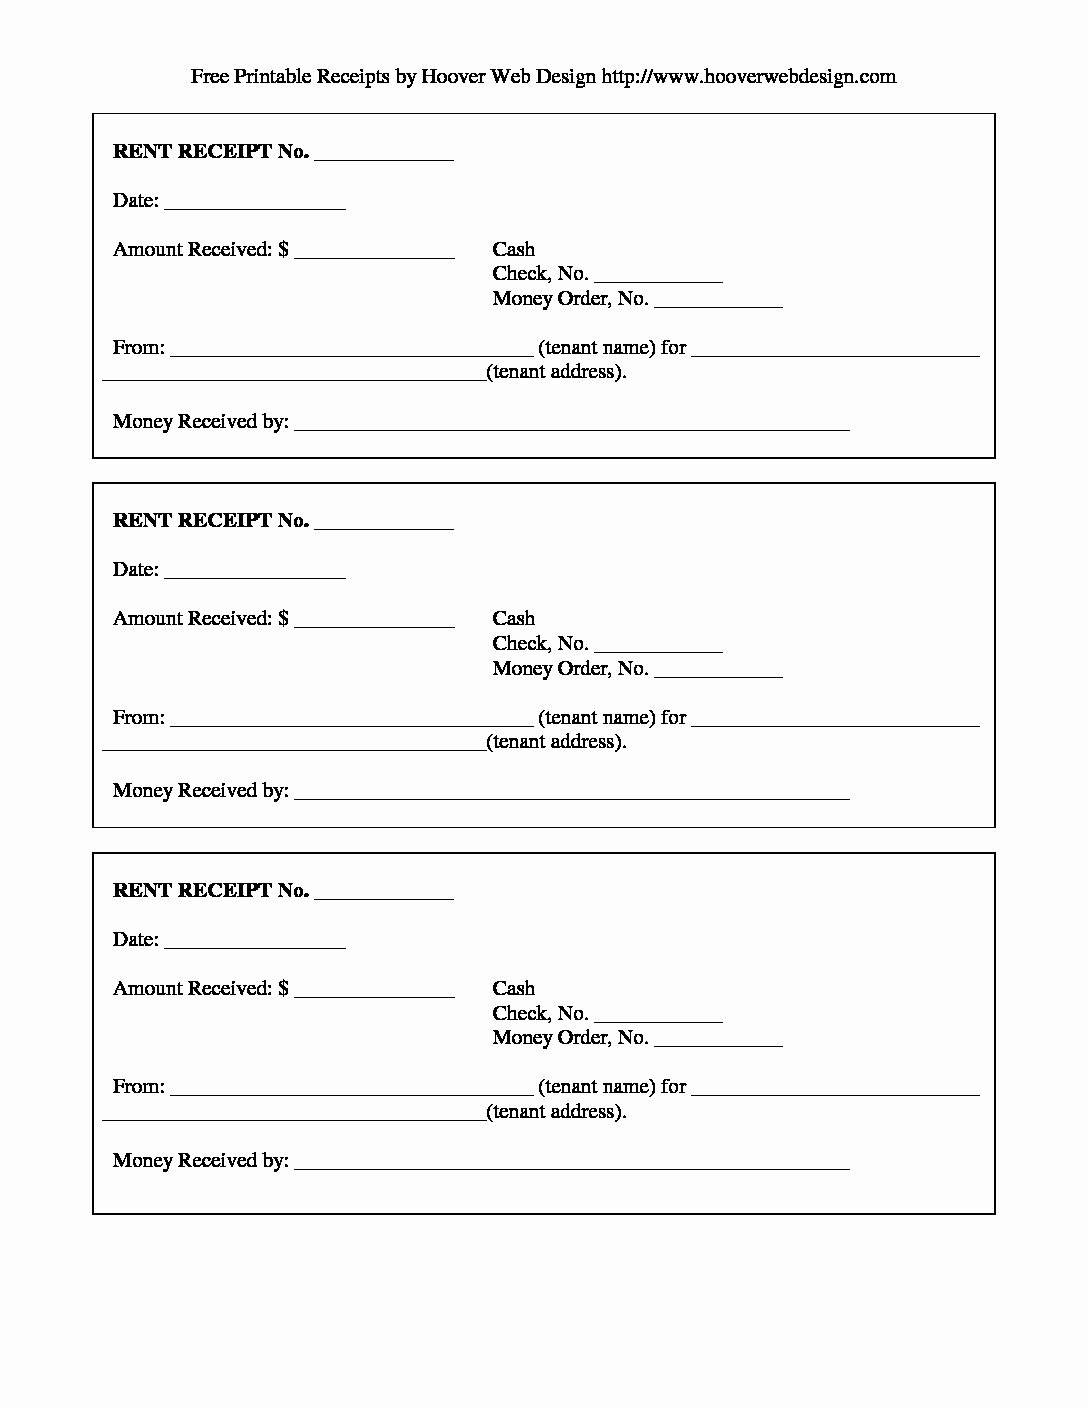 Free Printable Rent Receipt Unique Free Rent Receipt Template and What Information to Include